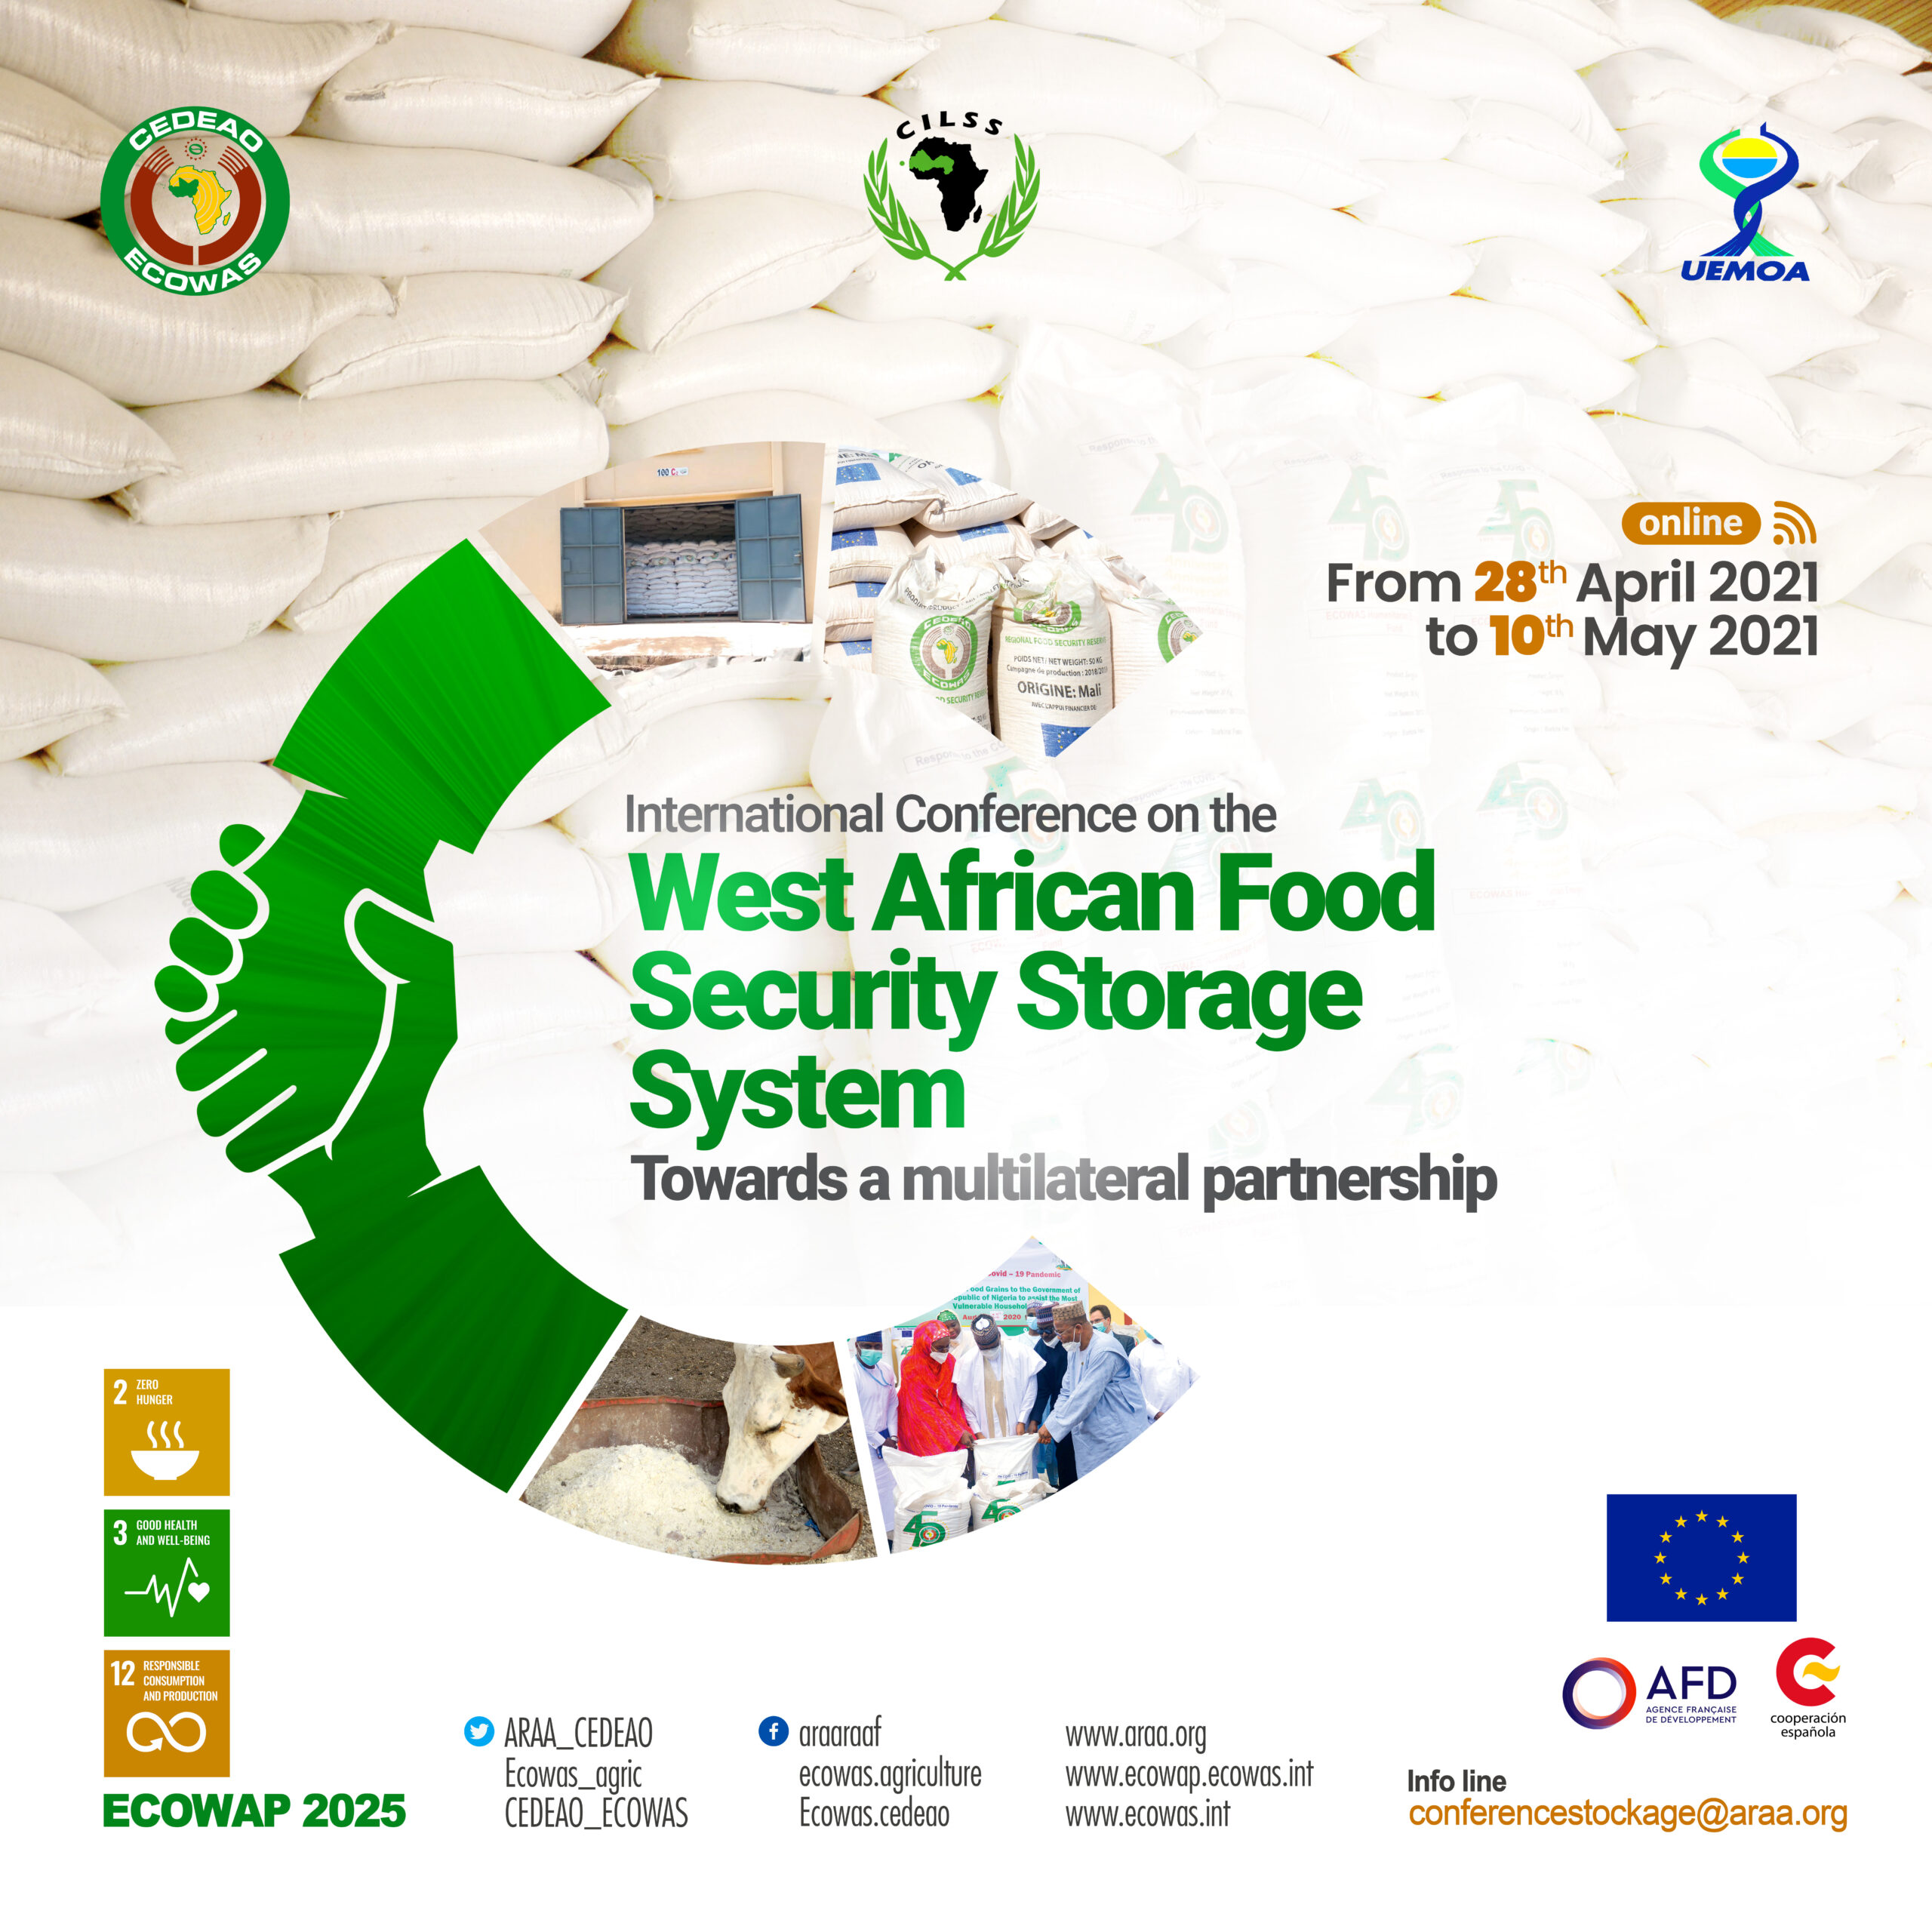 Int. Confab on the West African Food Security Storage System: ECOWAS to build a multilateral partnership around its experience